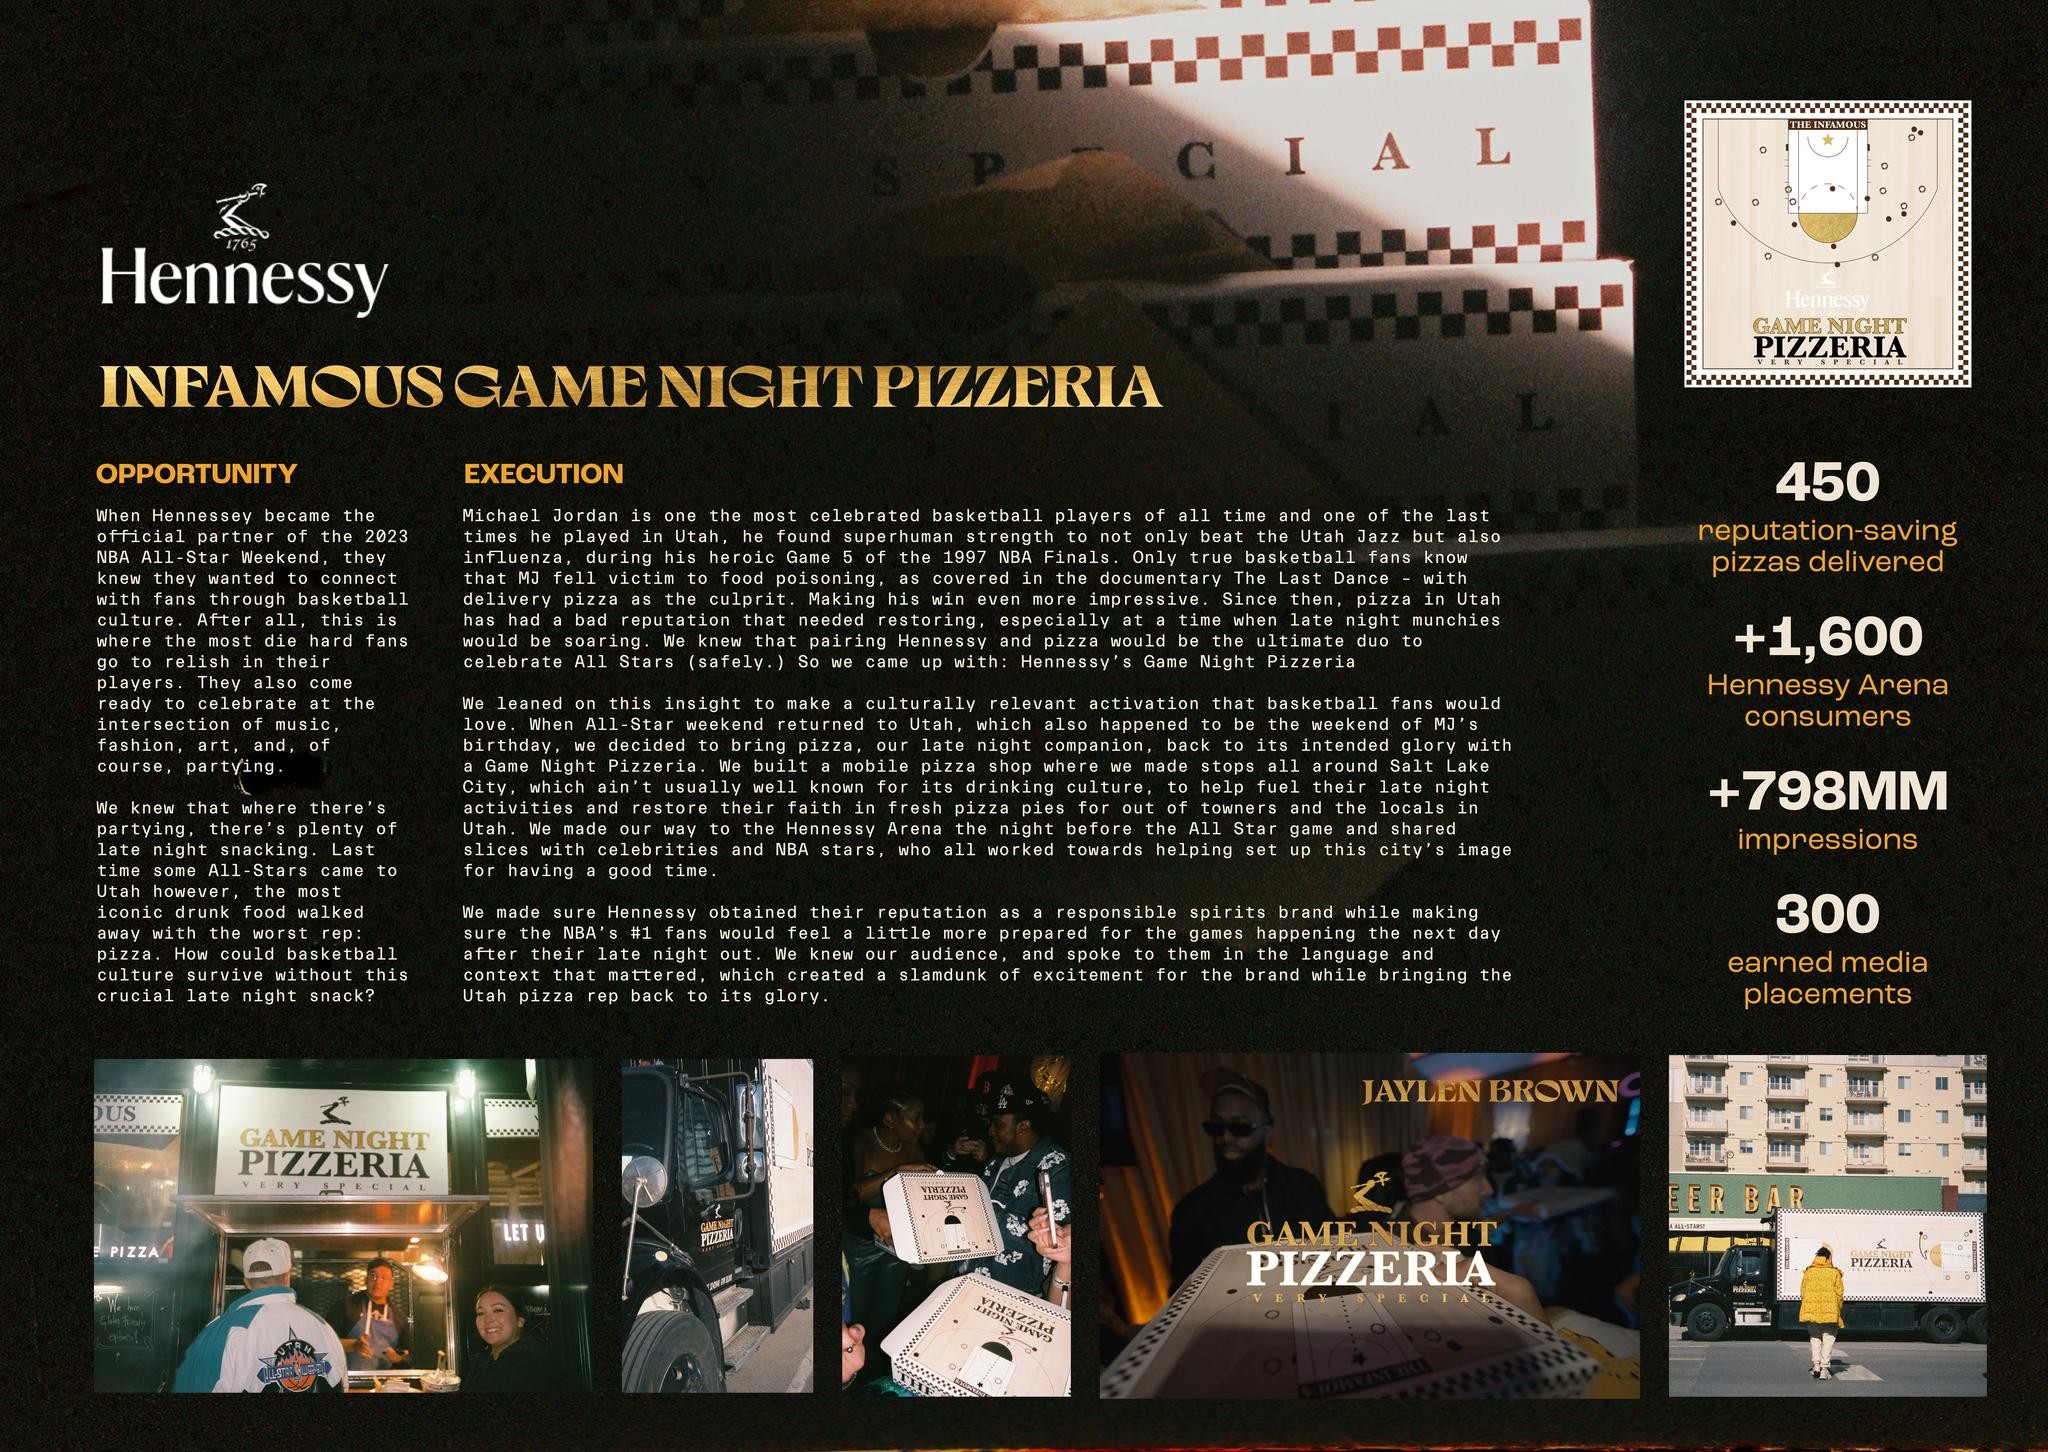 The Infamous Game Night Pizzeria